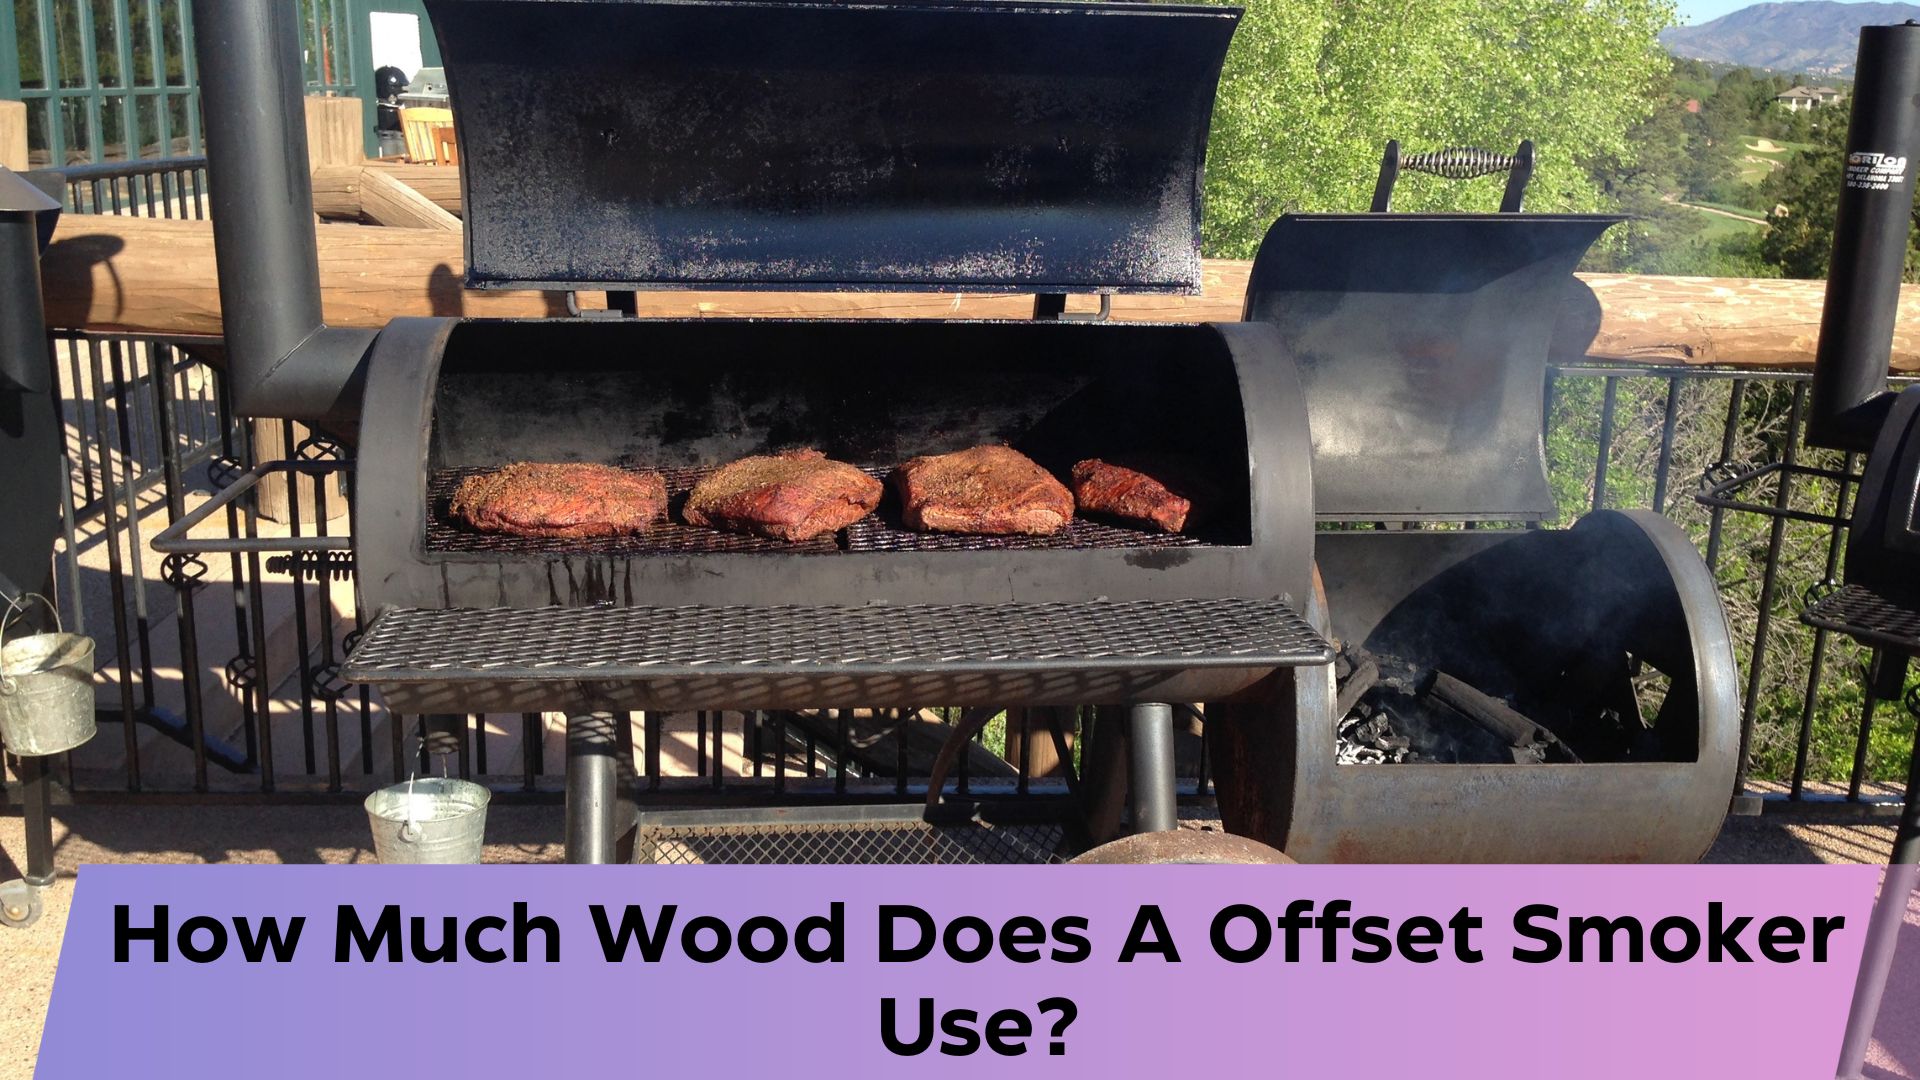 How Much Wood Does A Offset Smoker Use?